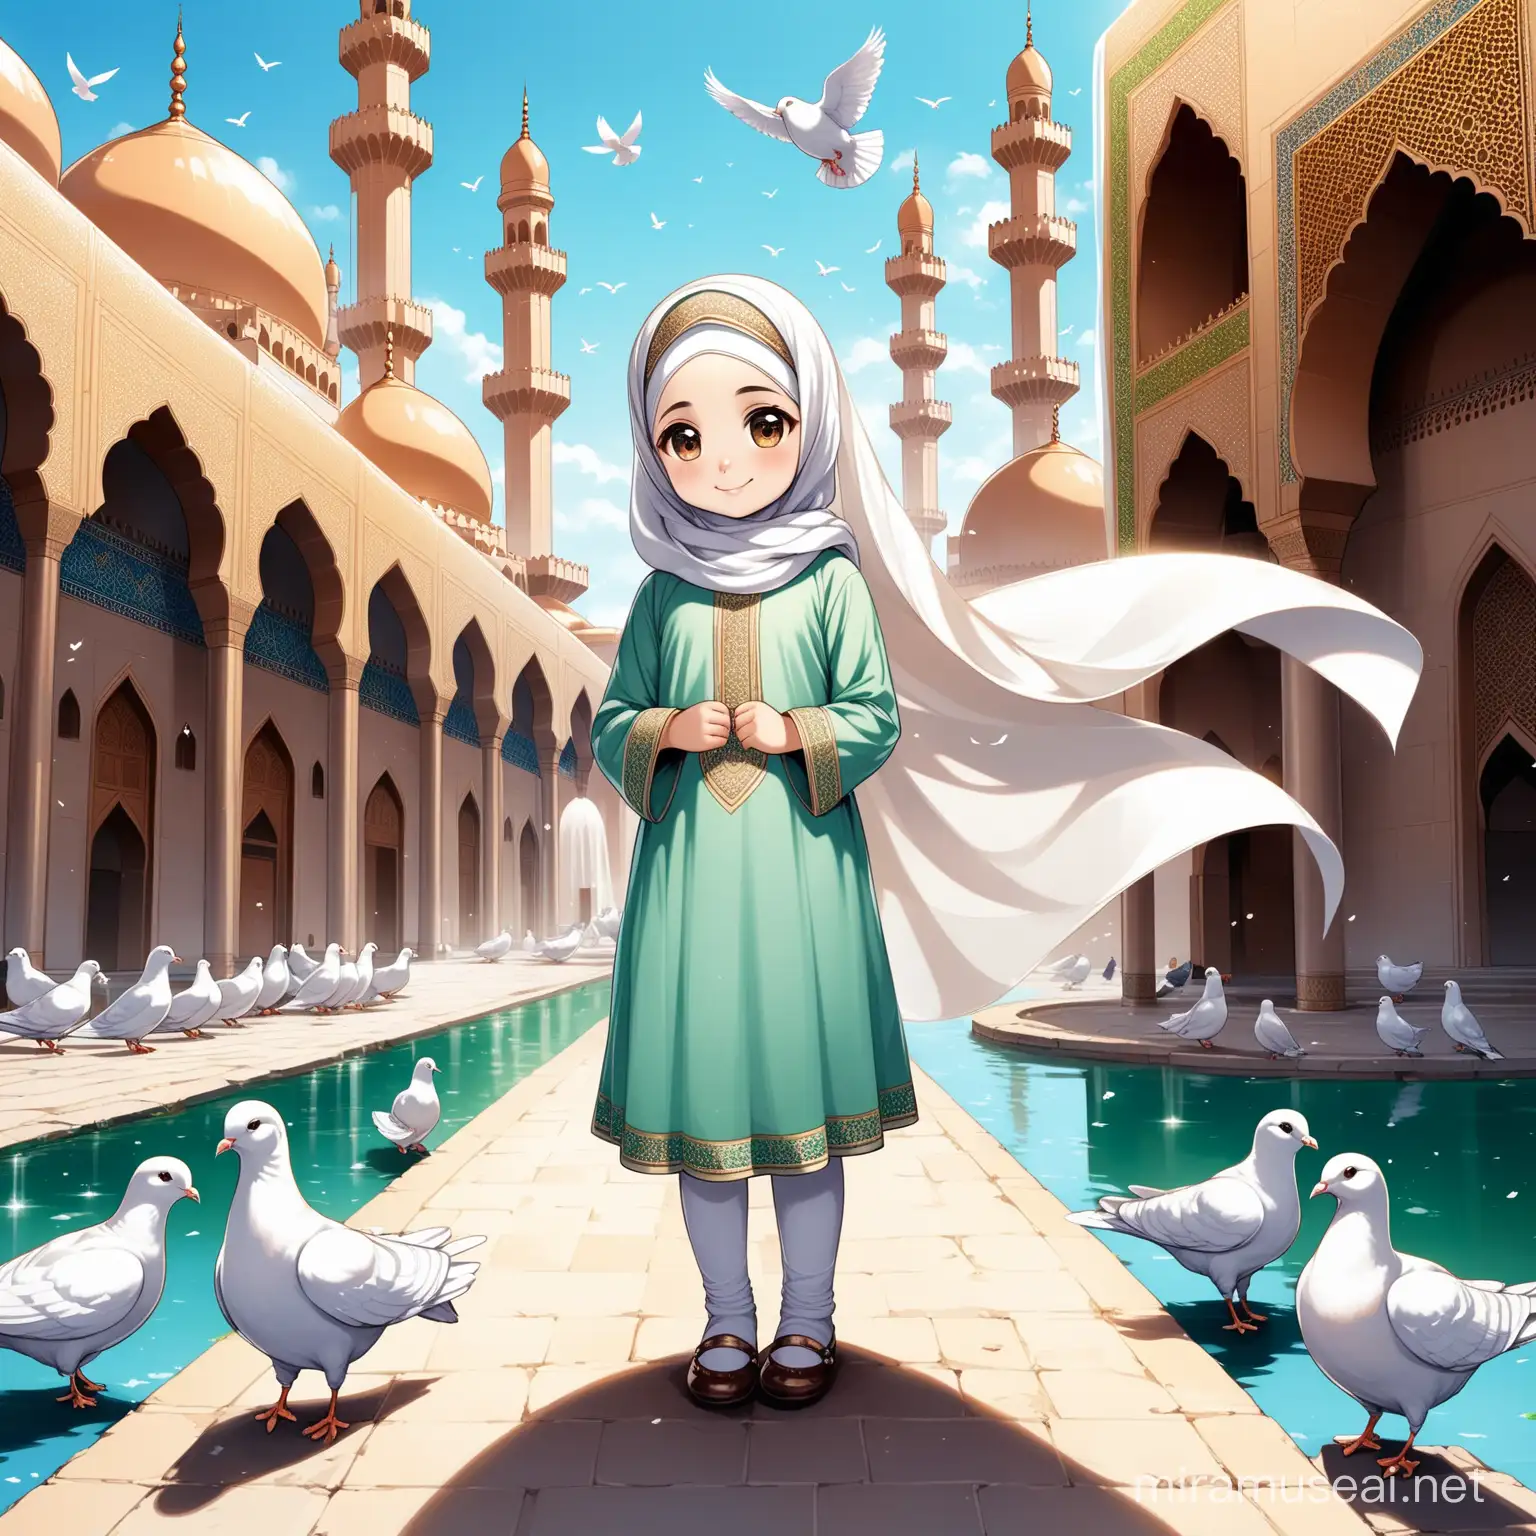 Character Persian little girl(full height, Big white flag in one hand proudly, Muslim, with emphasis no hair out of veil(Hijab), smaller eyes, bigger nose, white skin, cute, smiling, wearing socks, clothes full of Persian designs).

Atmosphere beautiful Jamkaran mosque, yard, the dome, pond with water fountain, many pigeons, nobody.